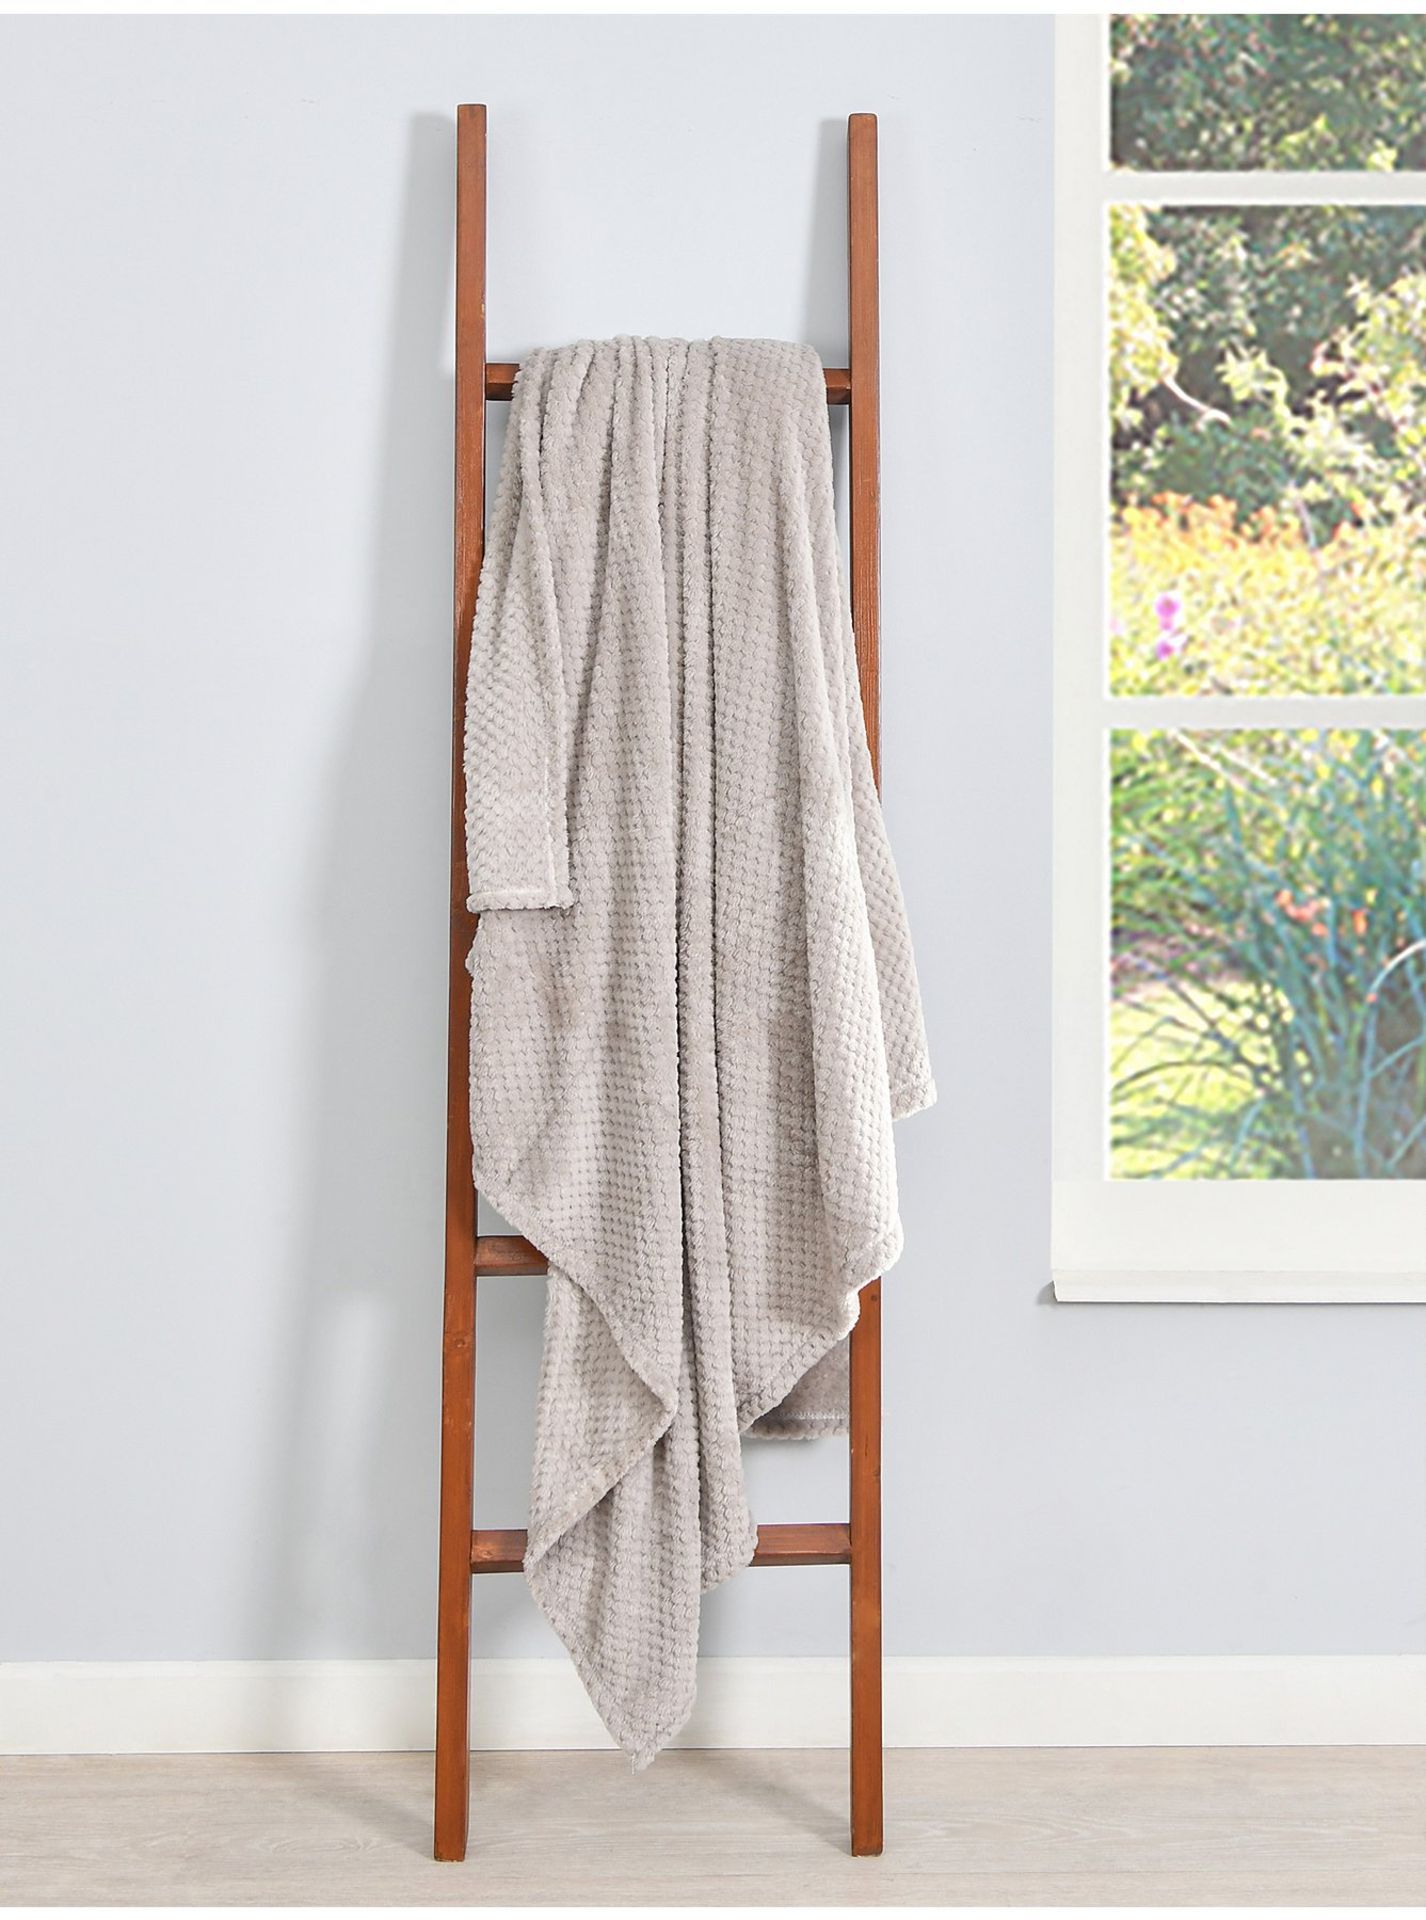 16x NEW & PACKAGED SLEEPDOWN Cosy Collection Soft Touch Waffle Fleece Throw 130 x 160cm - NATURAL. - Image 3 of 7